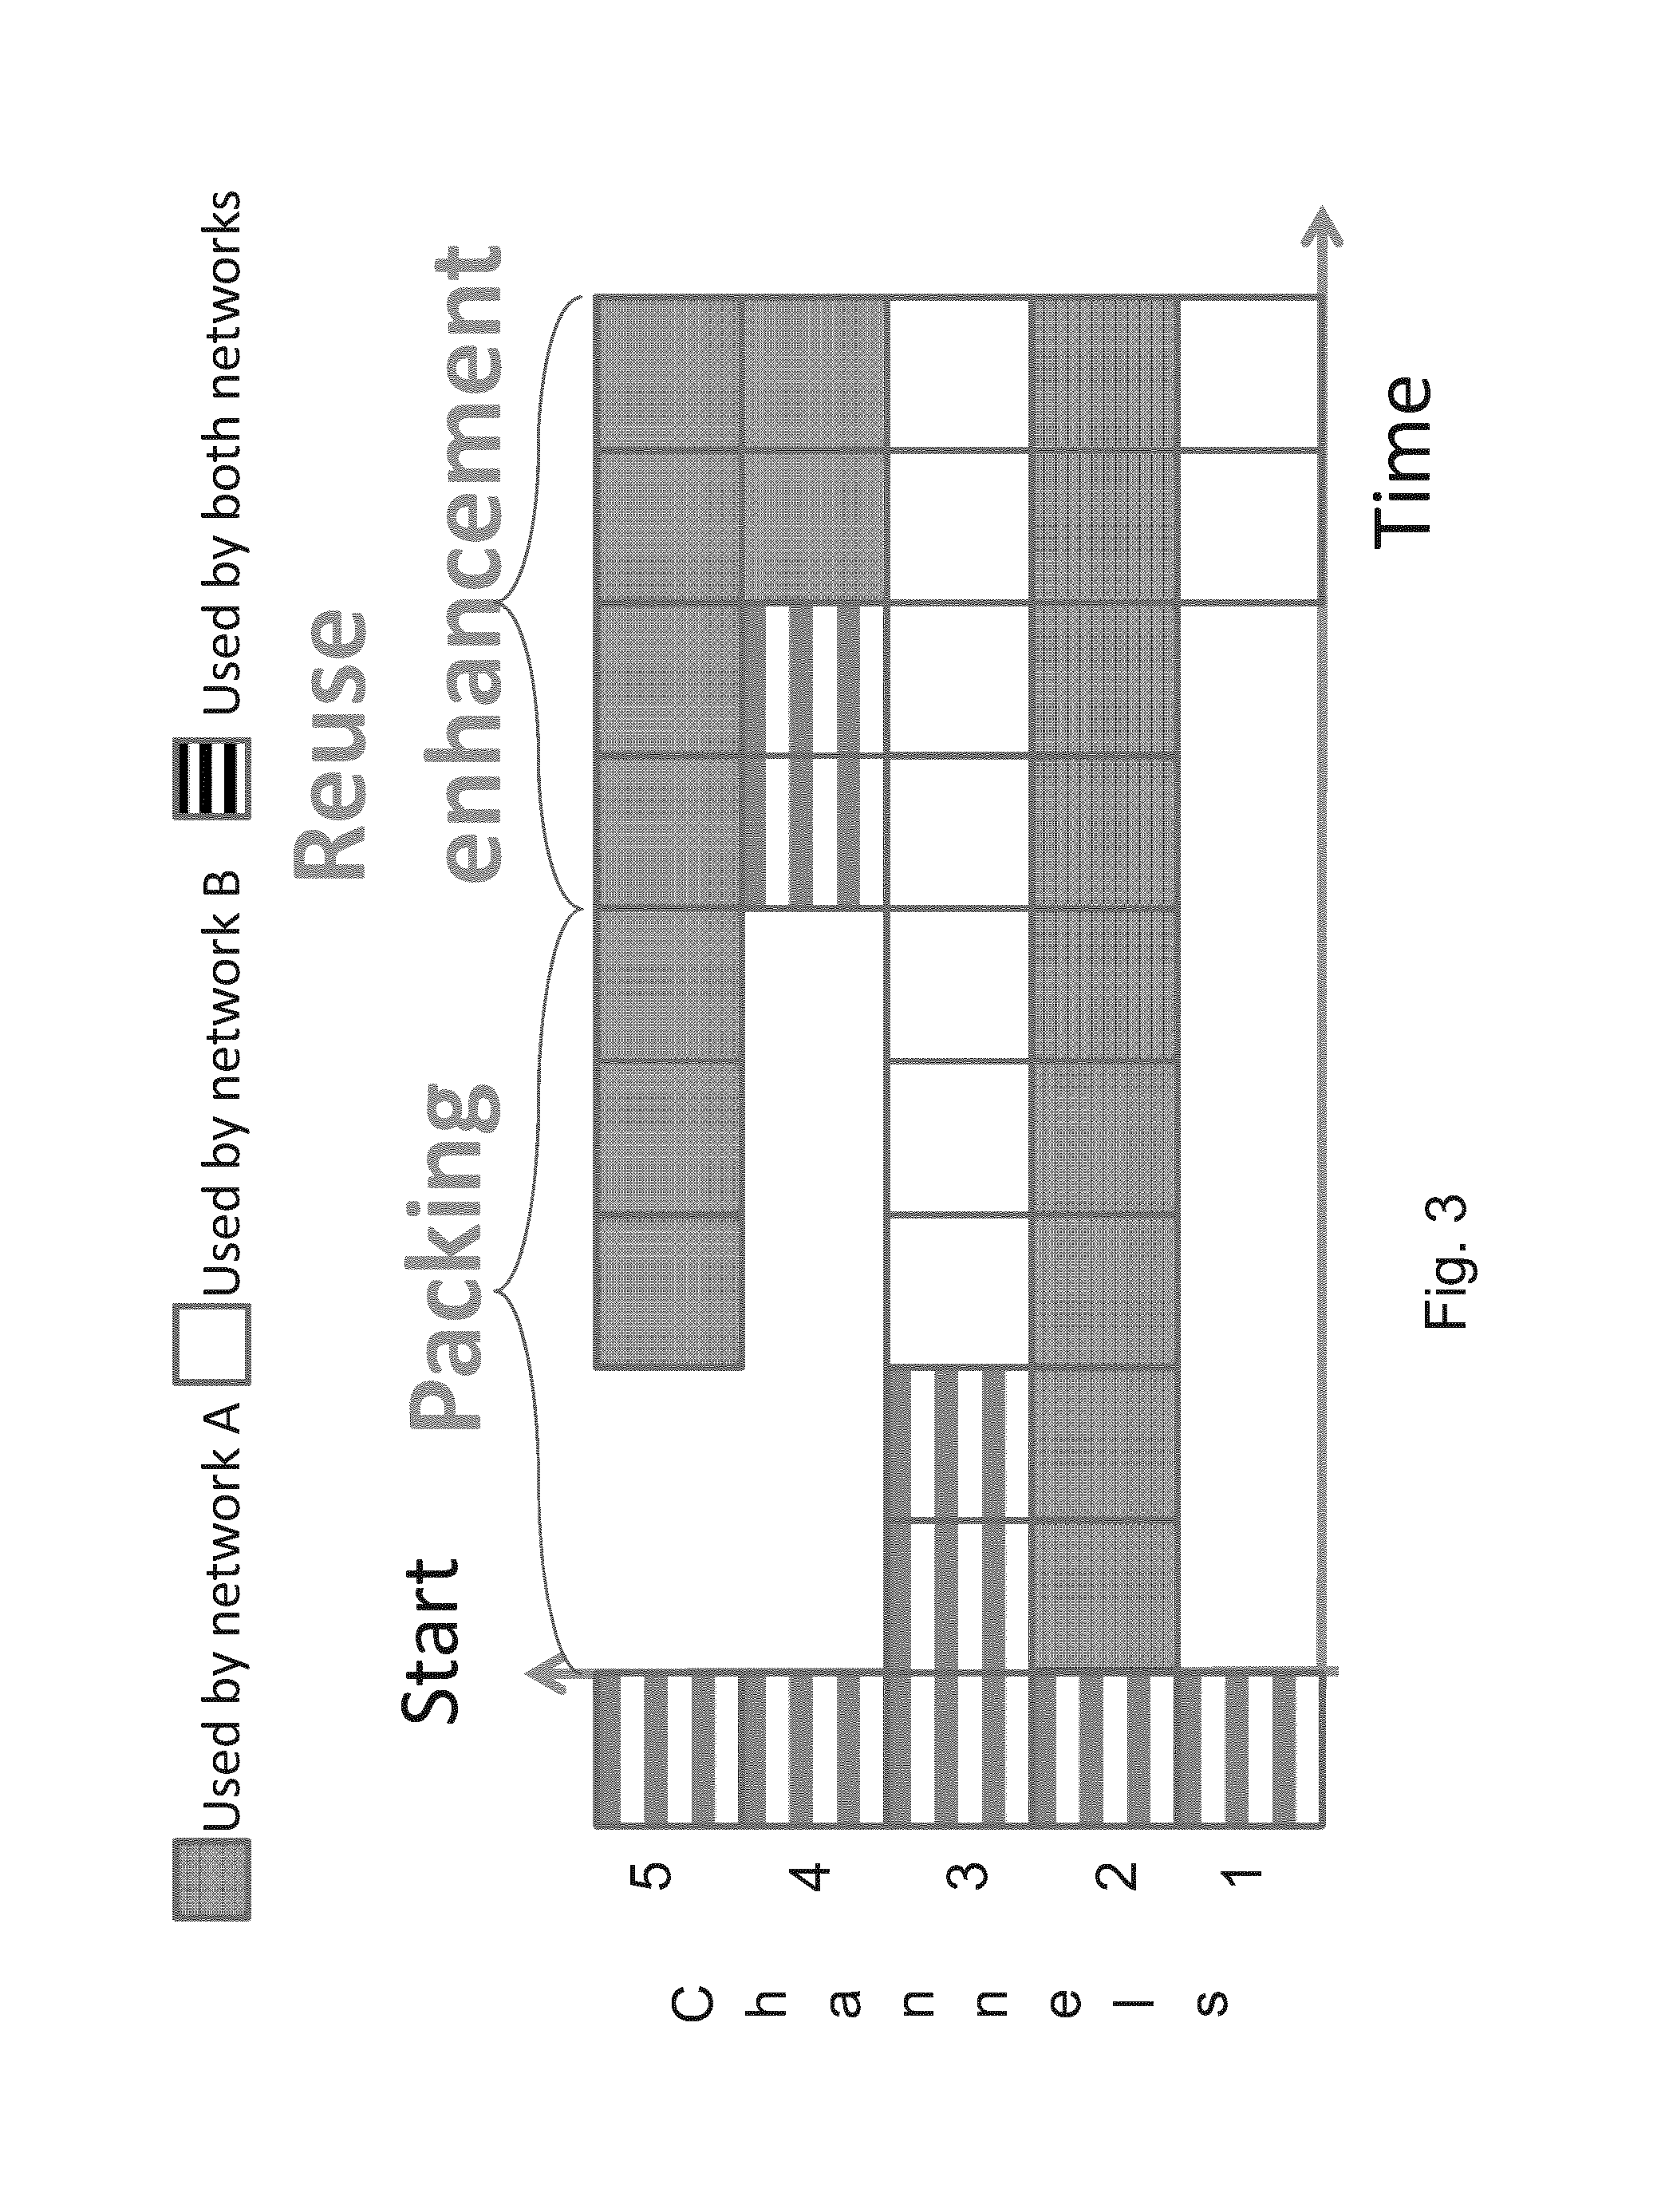 Efficient co-existence method for dynamic spectrum sharing